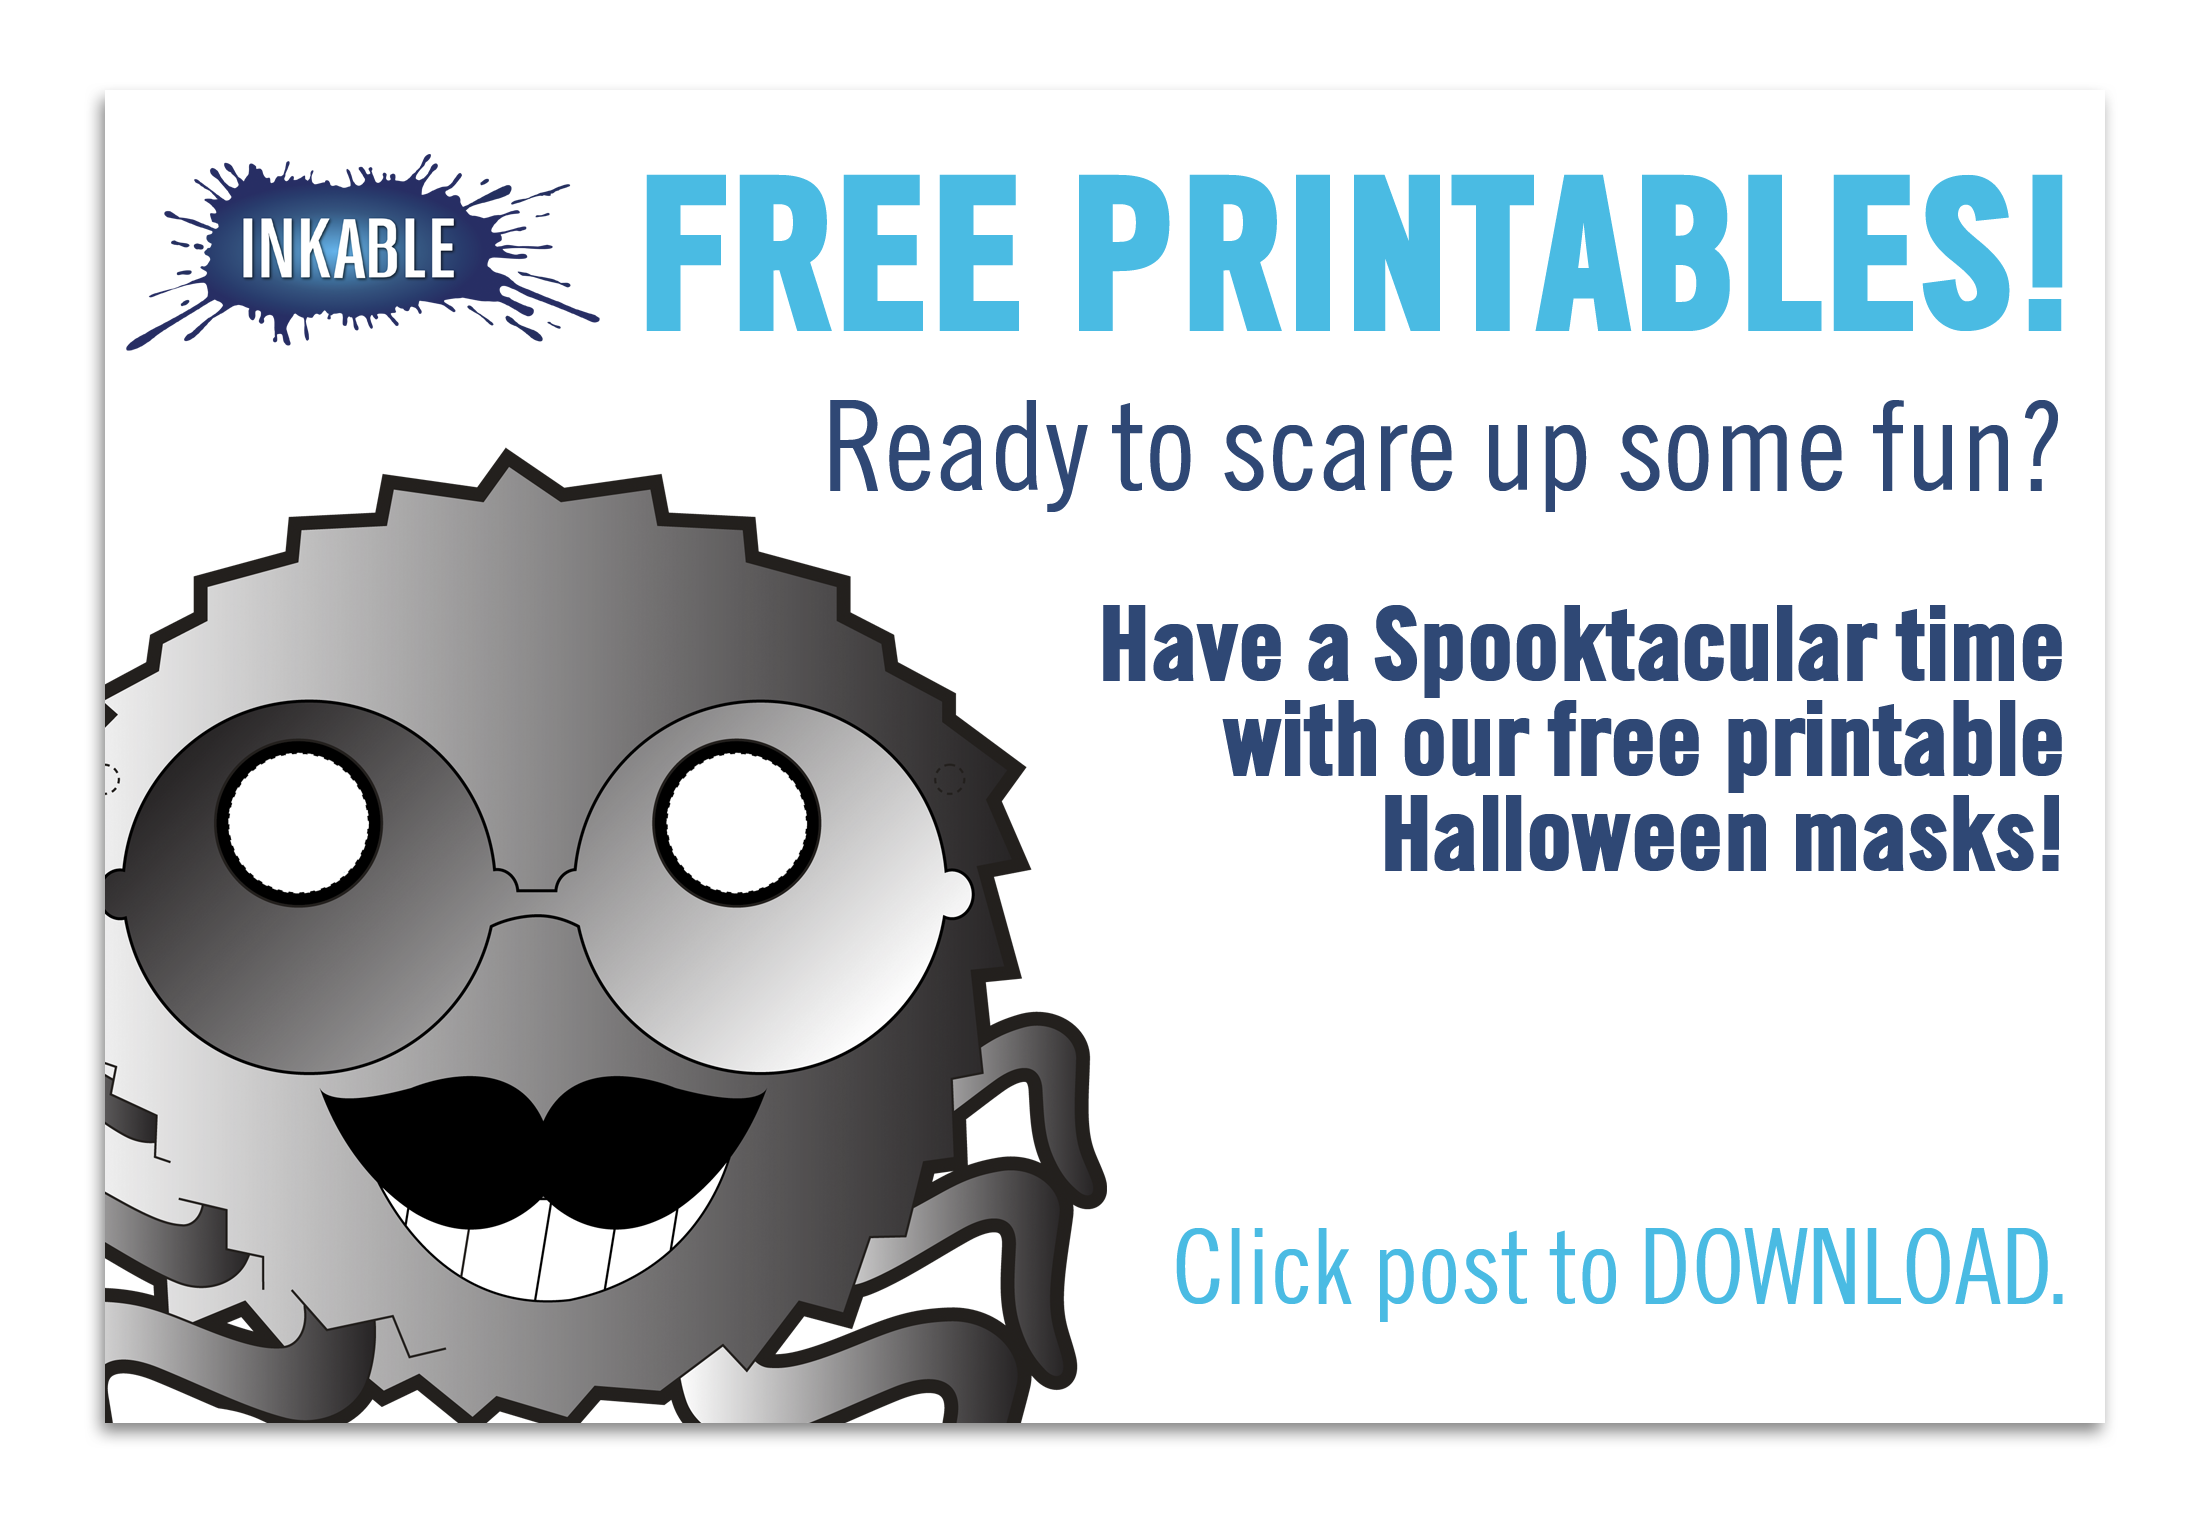 Have a Spooktacular Time with Free Printable Halloween Masks From Inkable!